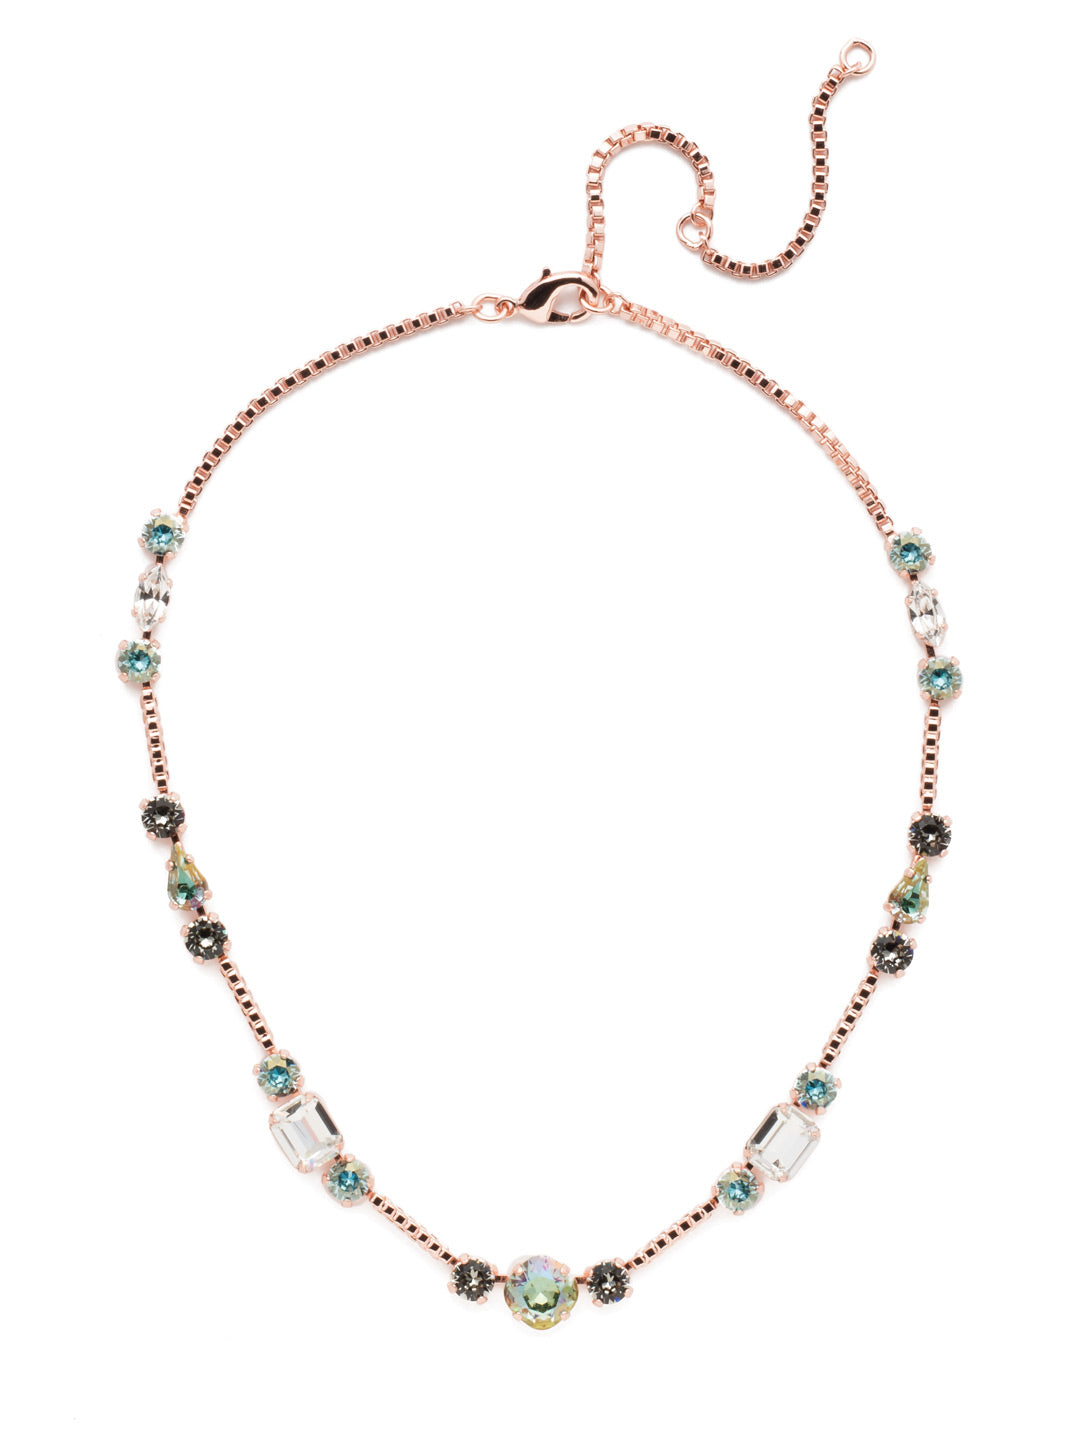 Poppy Tennis Necklace - NEN18RGCAZ - The Poppy Tennis Necklace is anything but ordinary. Wear it all when you combine classic, baguette and navette sparklers. It's structured and sophisticated. From Sorrelli's Crystal Azure collection in our Rose Gold-tone finish.